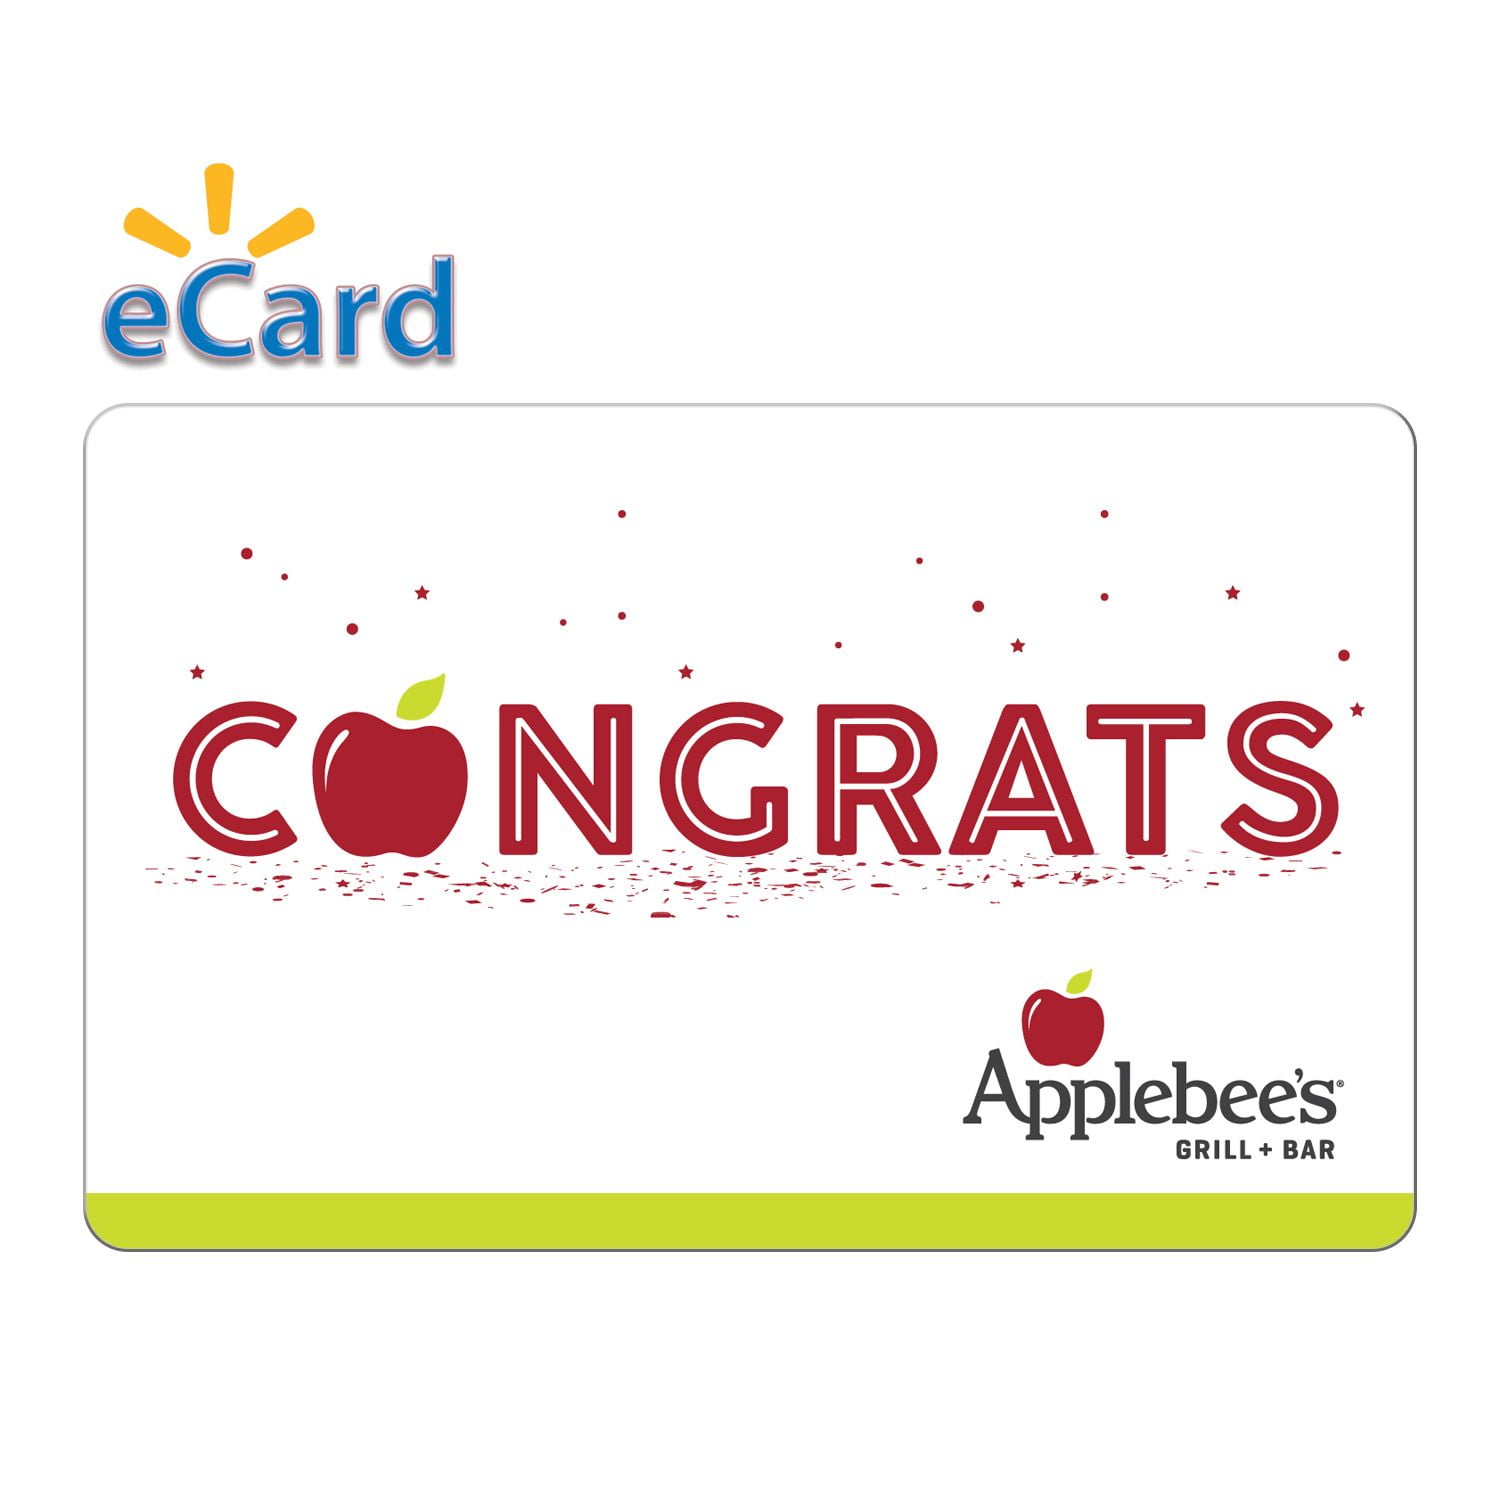 Applebee's Congrats $25 Gift Card (Email Delivery)